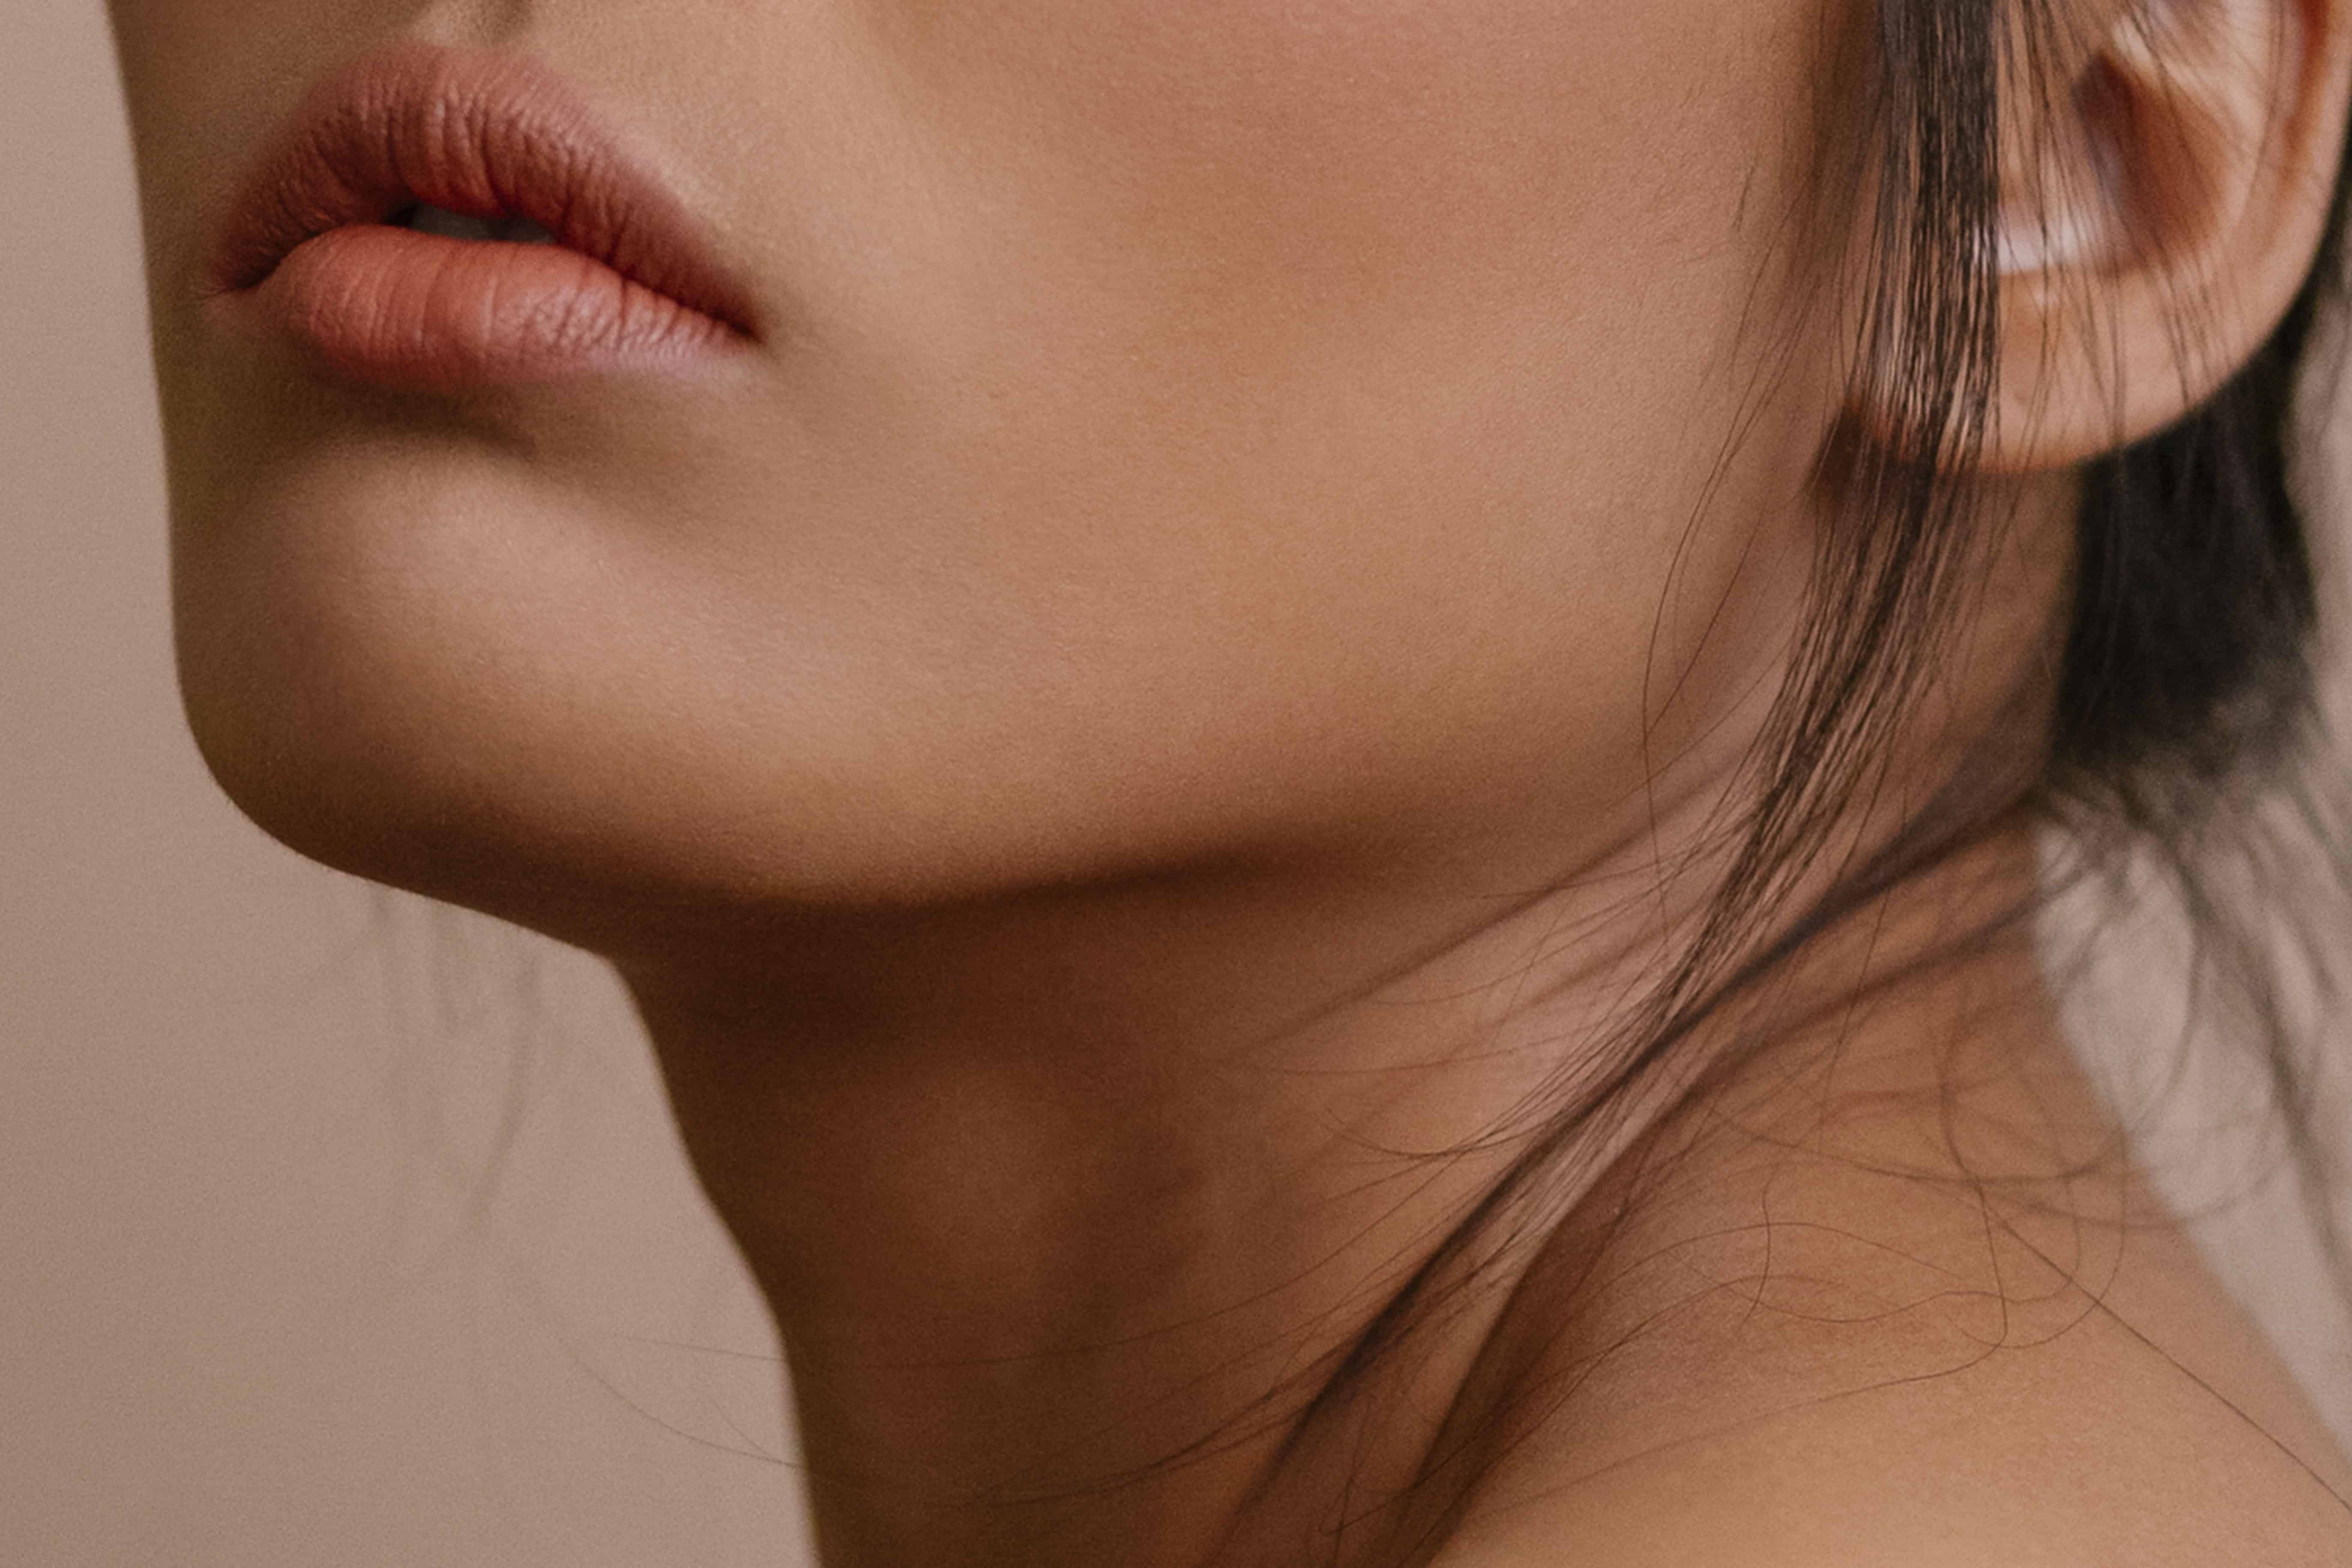 Both Botox and fillers can reduce lines on the neck caused by age and lifestyle. But that's where the similarities between the two injectables end.